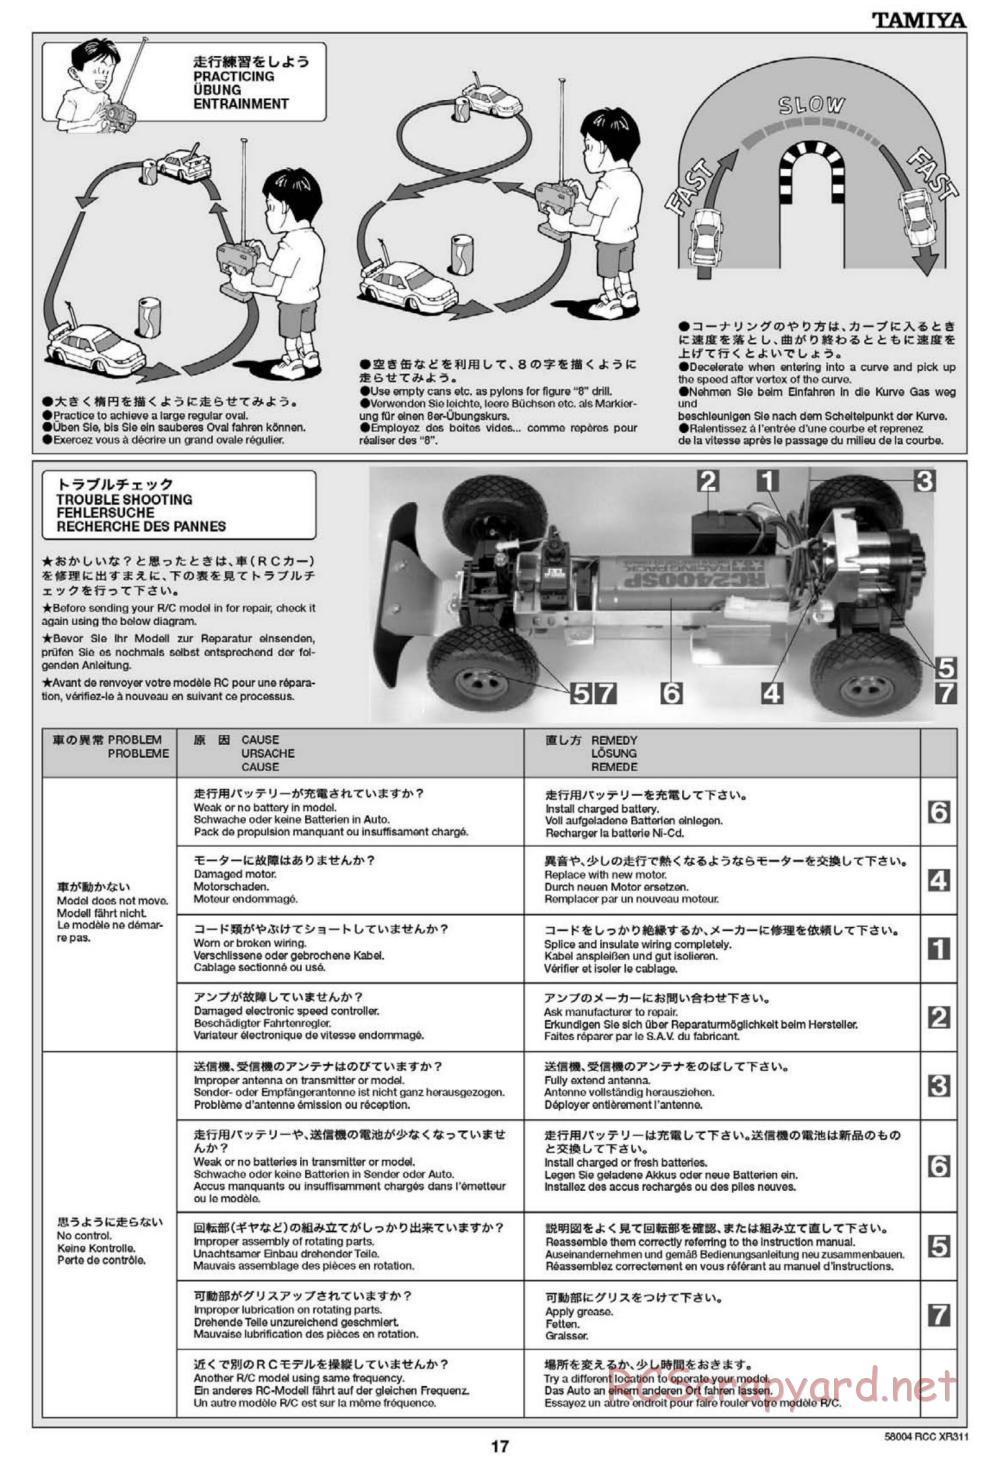 Tamiya - XR311 Combat Support Vehicle (2012) Chassis - Manual - Page 17